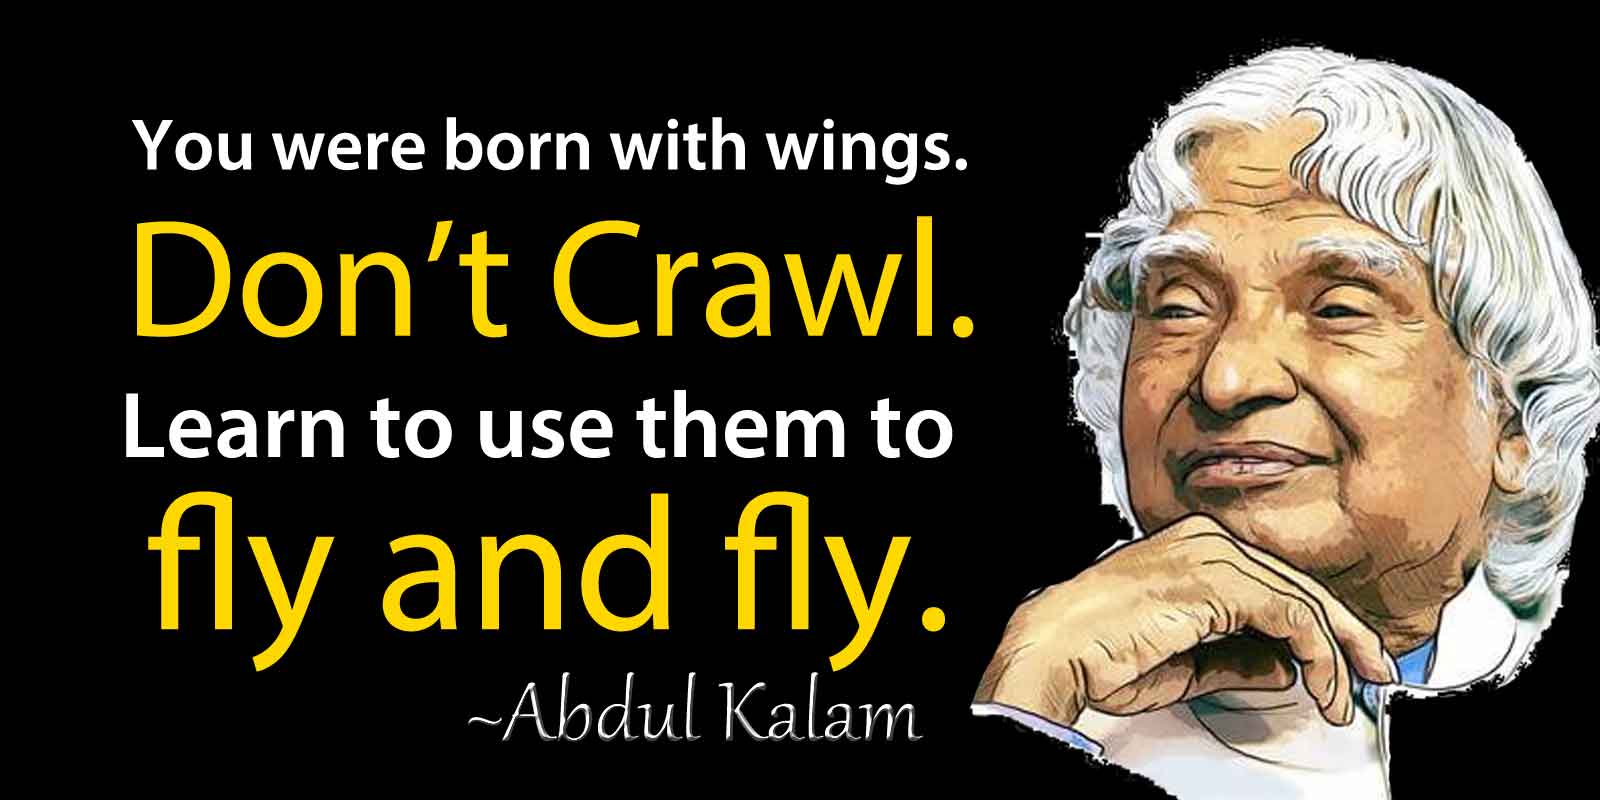 Incredible Collection of 999+ Abdul Kalam Quotes Images: Full 4K Quality